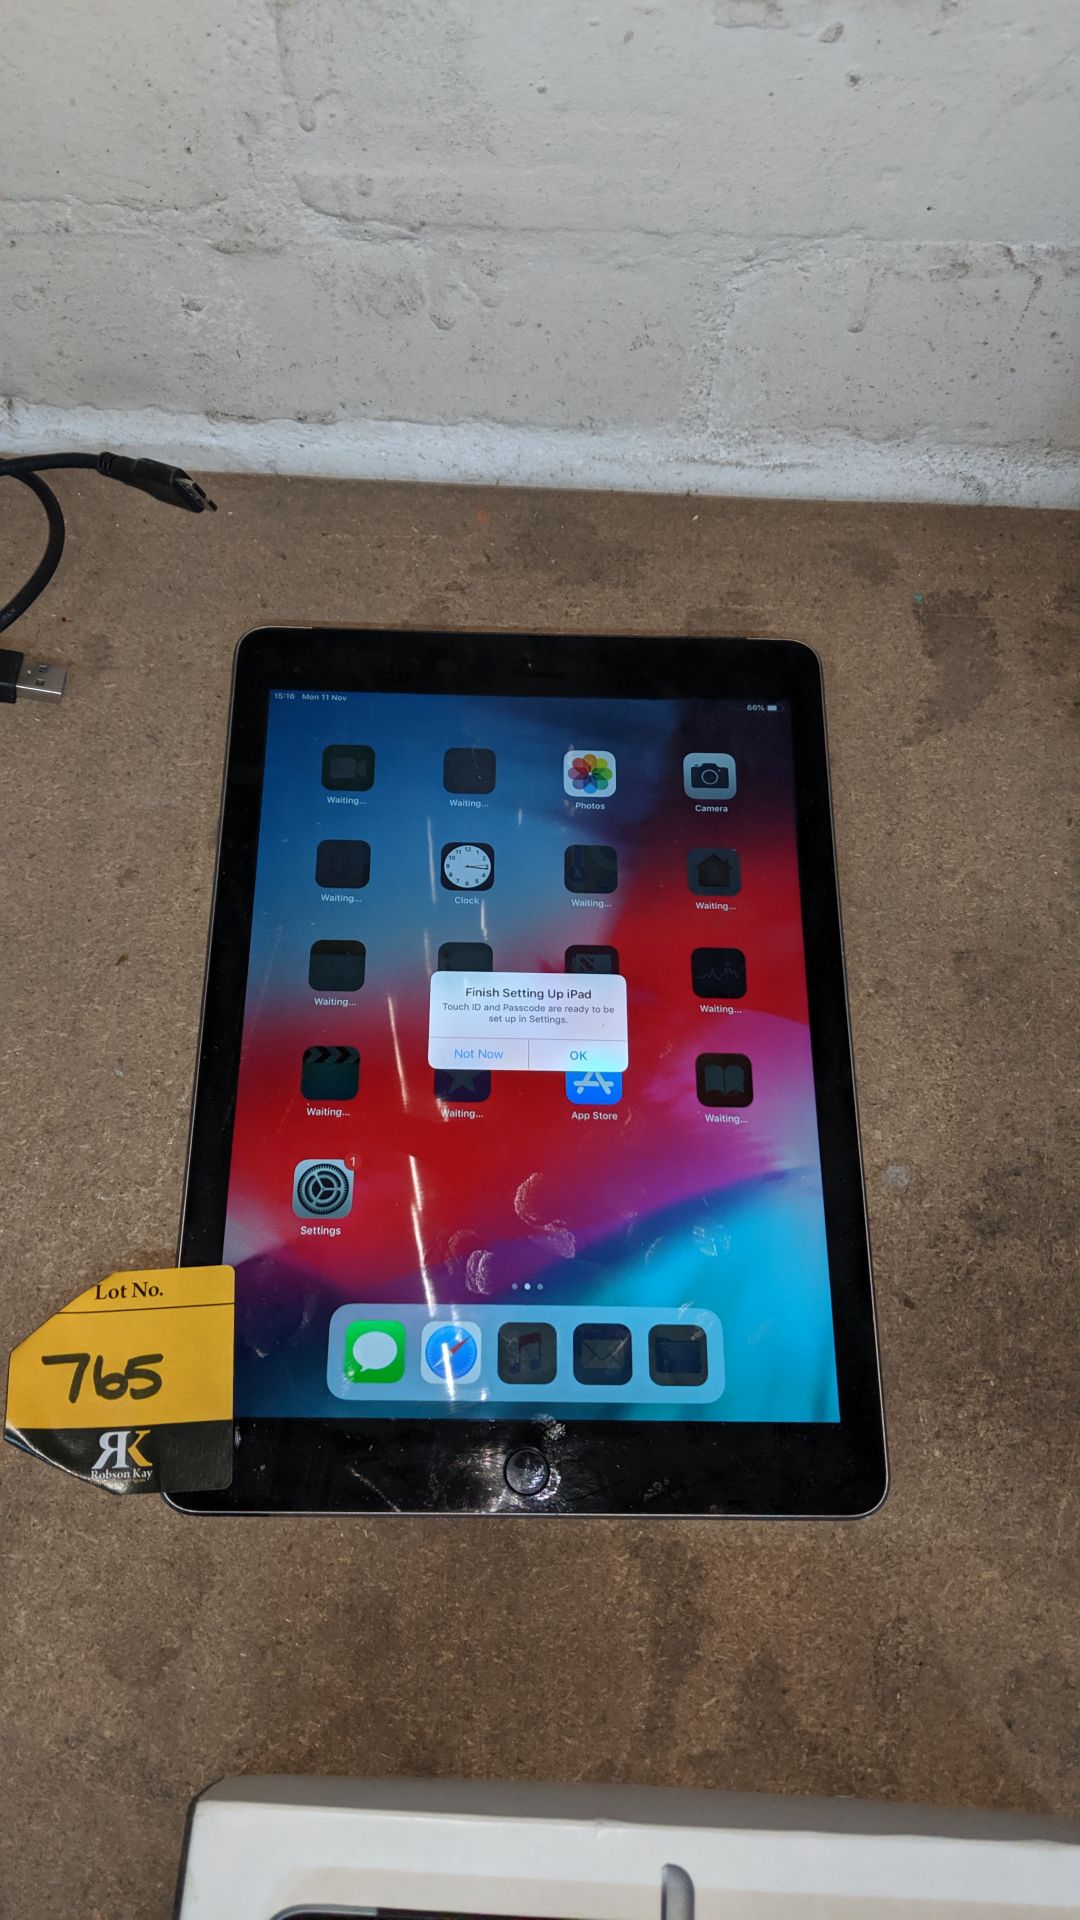 Apple iPad Air 2, 16Gb, Space Grey, product code A1567, no charger. This is one of a large number of - Image 2 of 6